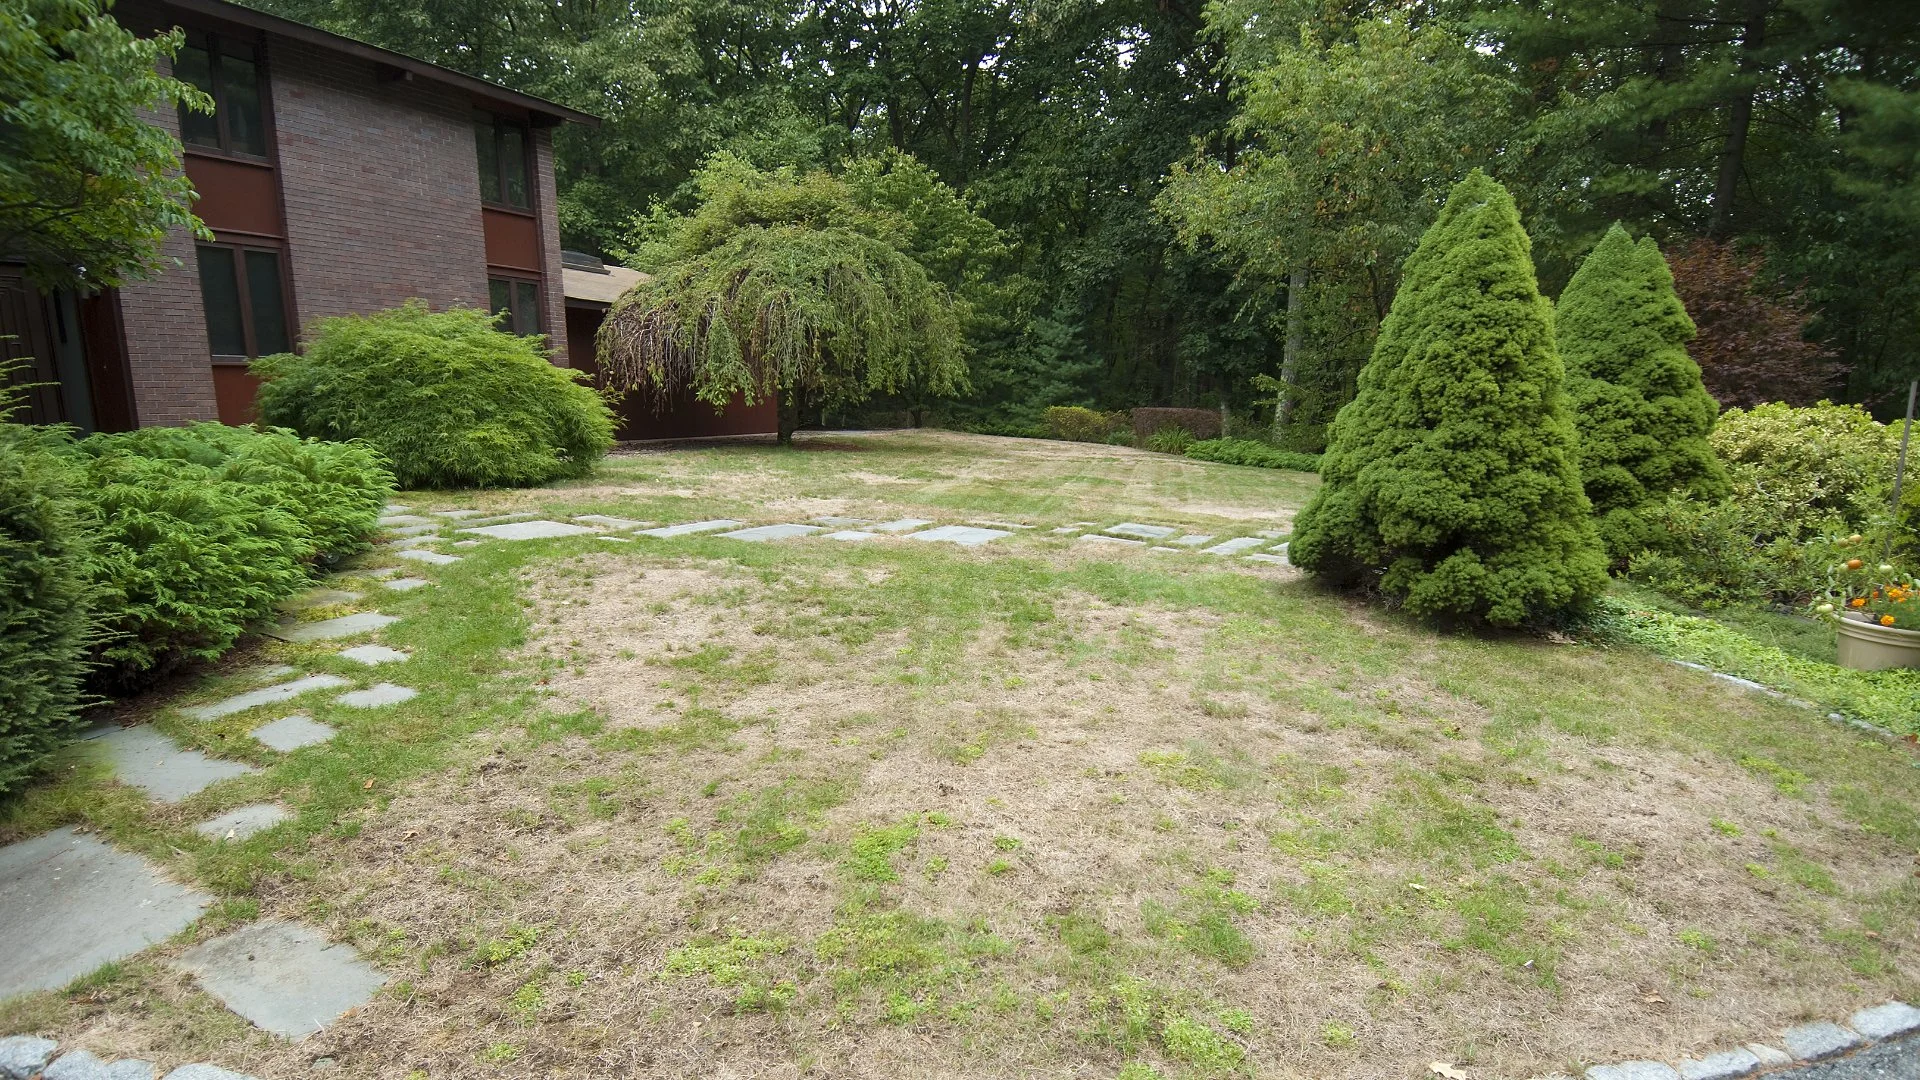 Is Your Lawn Looking Worse for Wear? Schedule a Lawn Renovation Service!